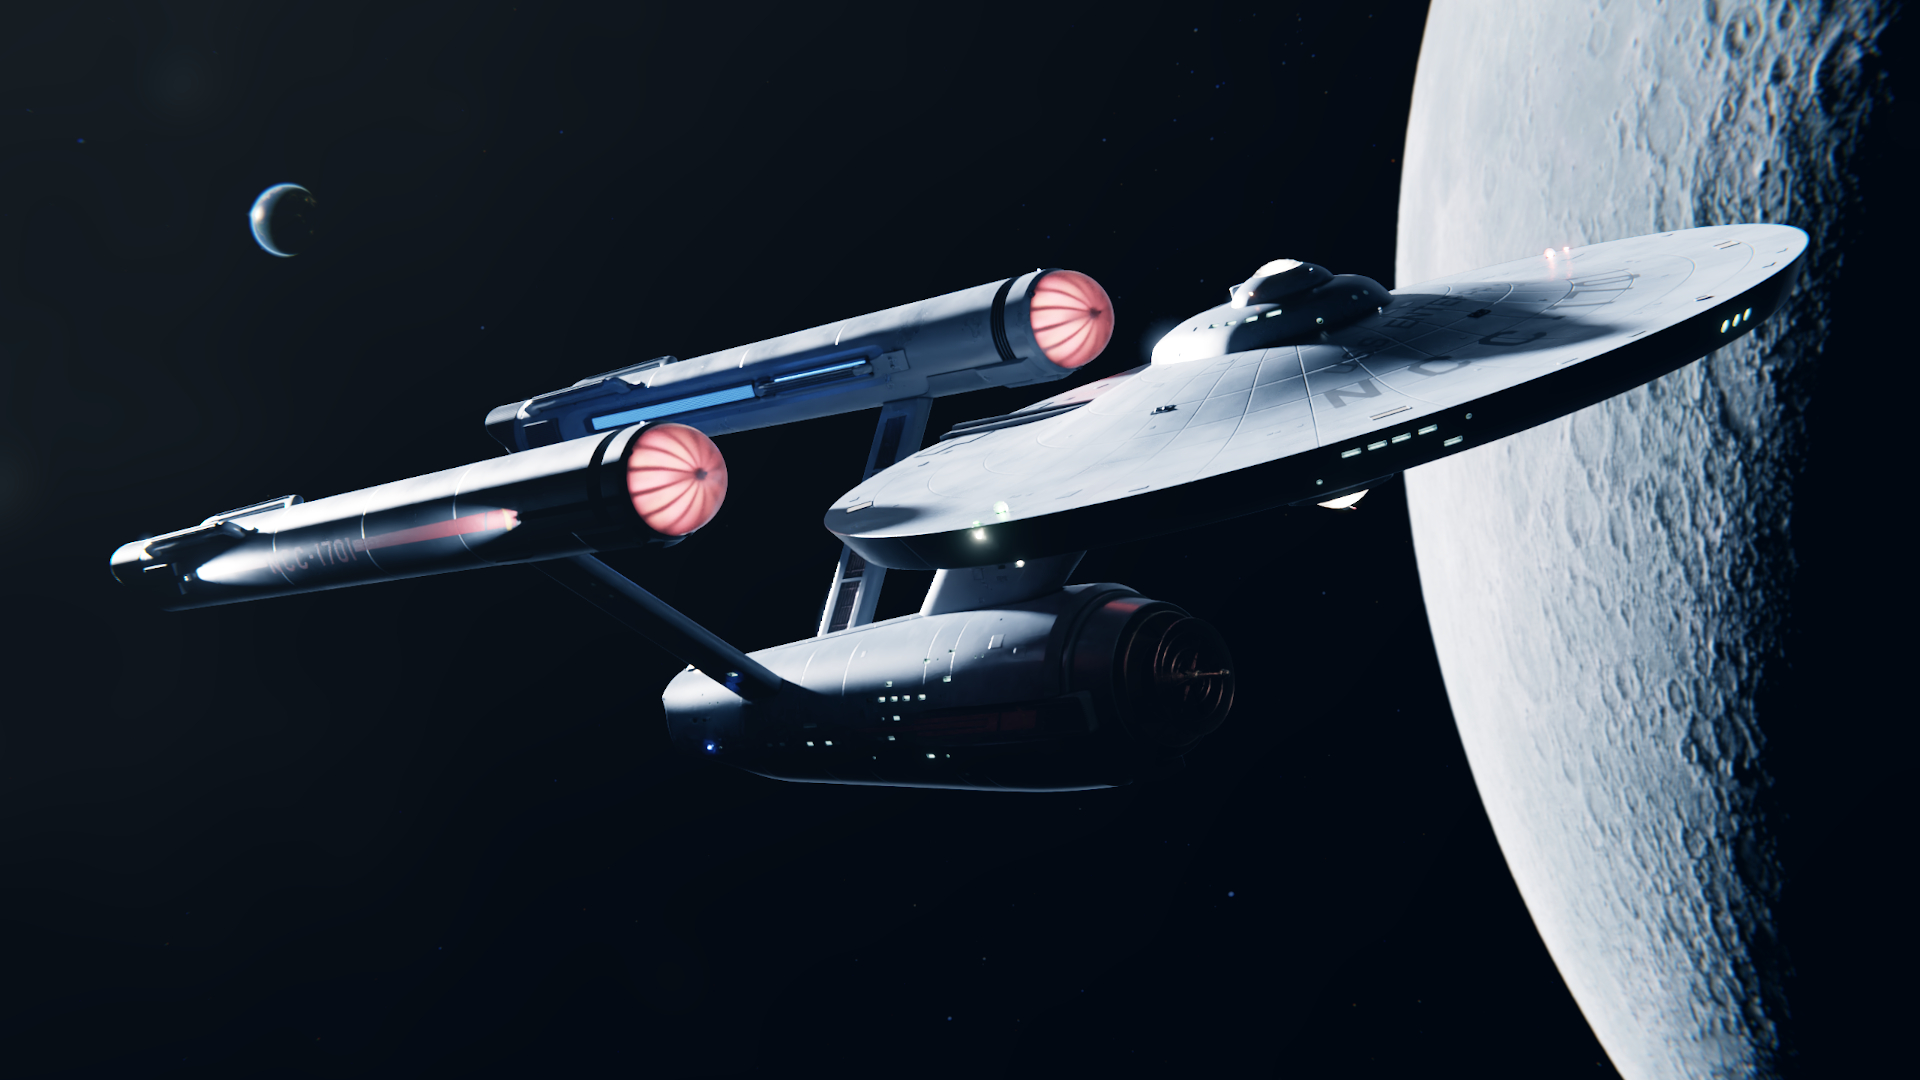 Star Trek' spaceships through the years (pictures) - CNET